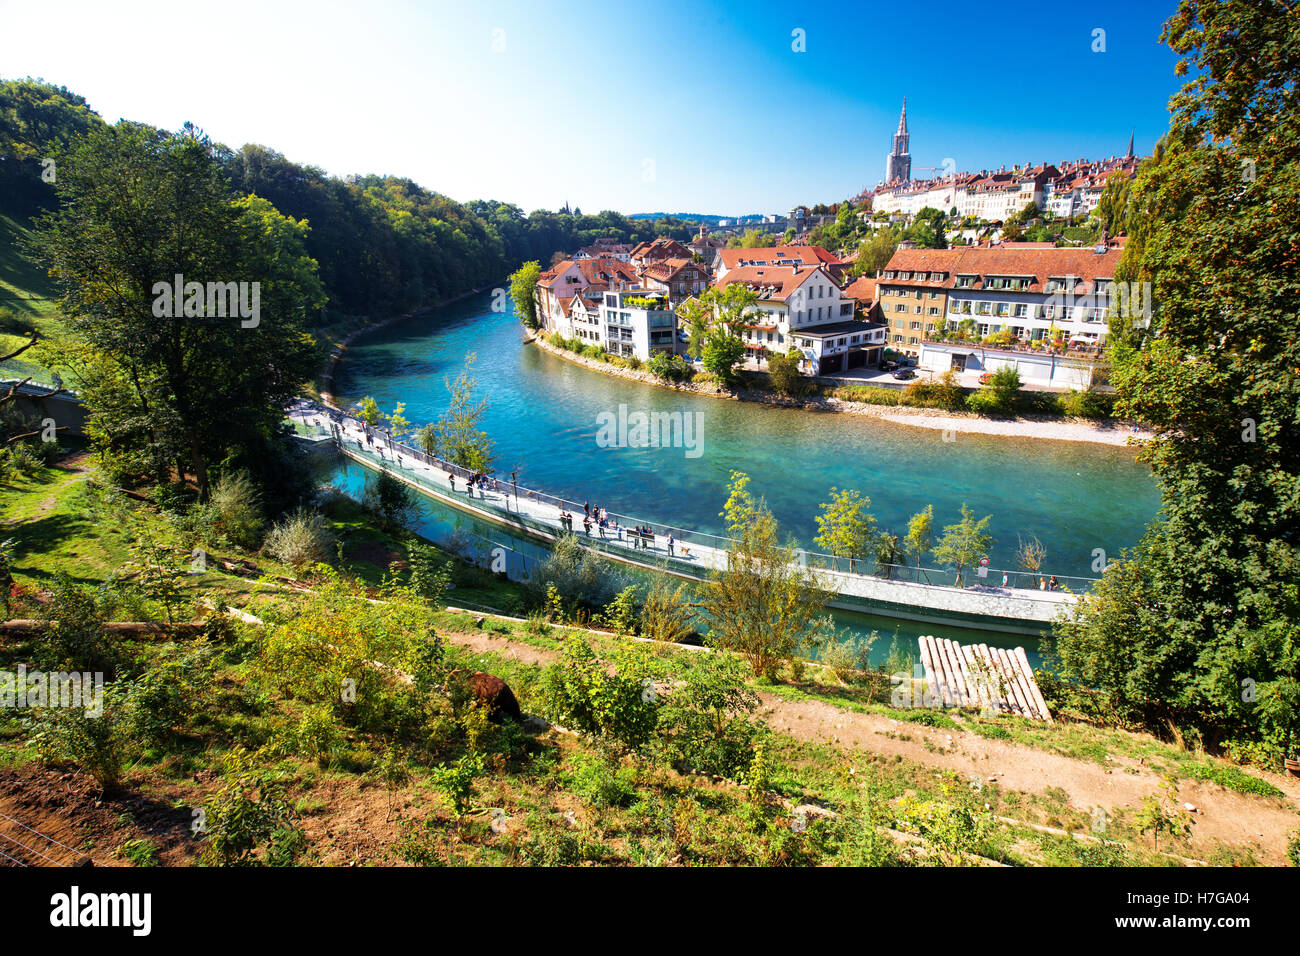 View of Bern old city center with river Aare. Bern is capital of Switzerland and fourth most populous city in Switzerland. Stock Photo